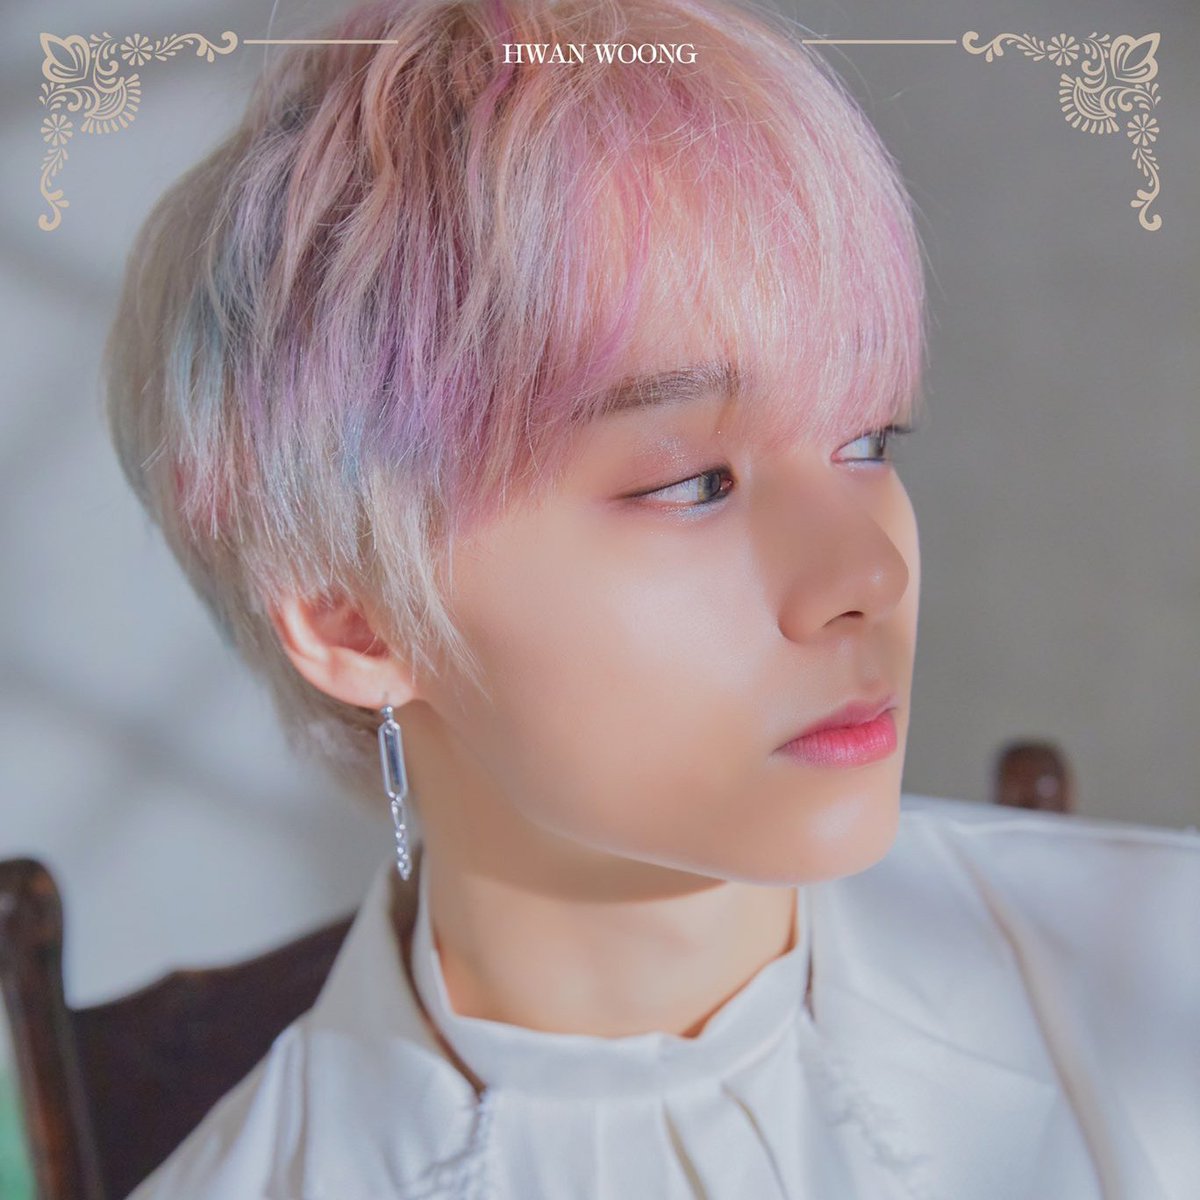 yeo hwanwoong, a thread of just unicorn ethereal perfection 